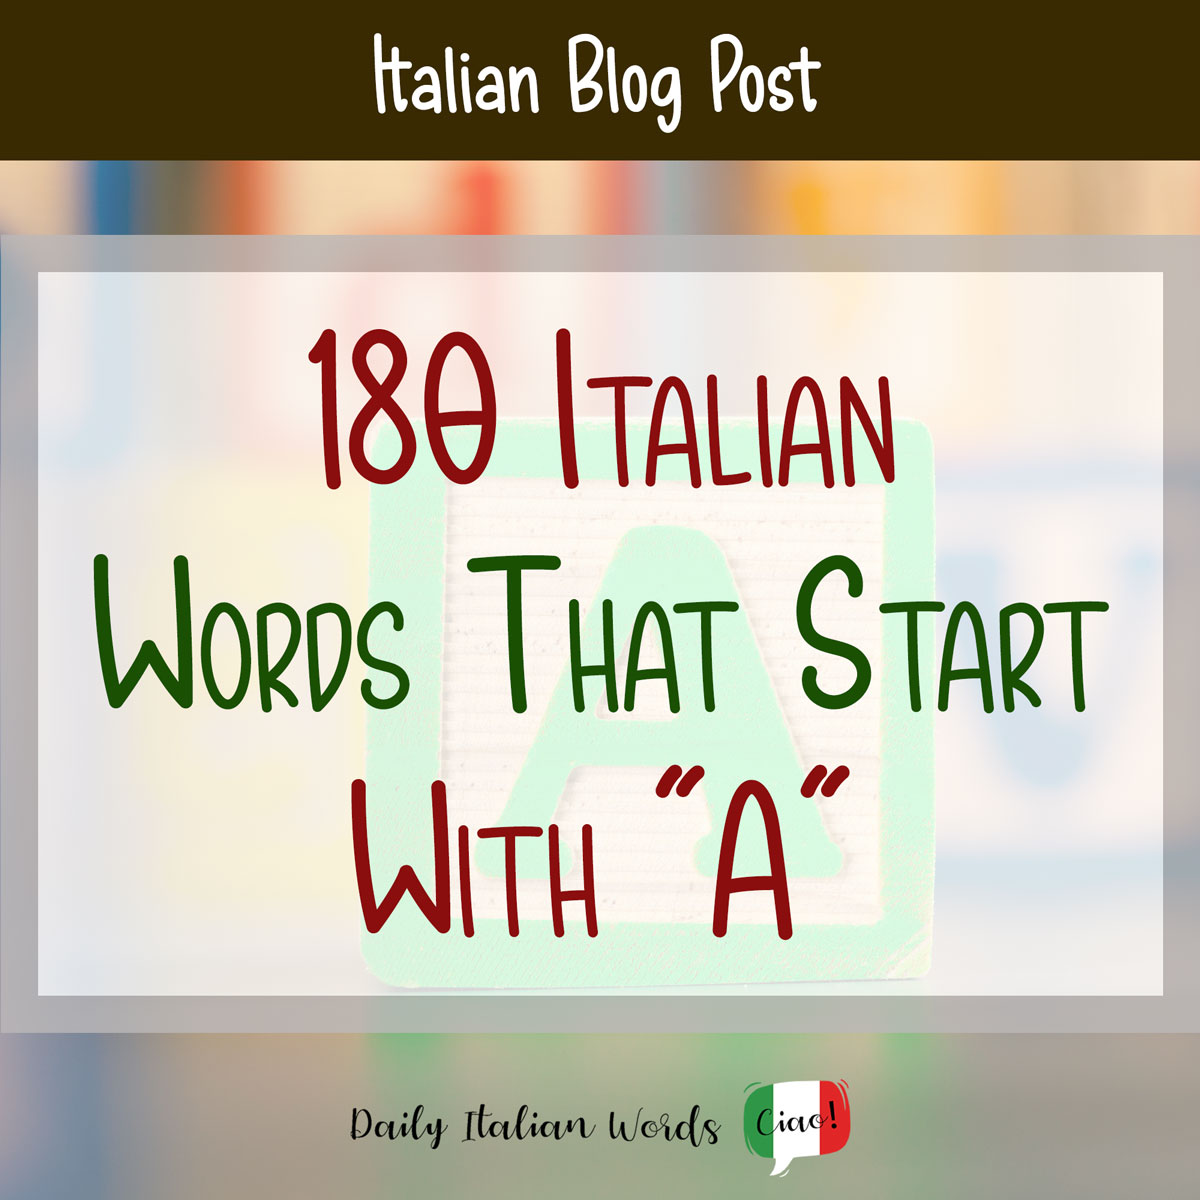 180 Vital Italian Phrases That Begin With “A” (+ 20 In style Italian Names)